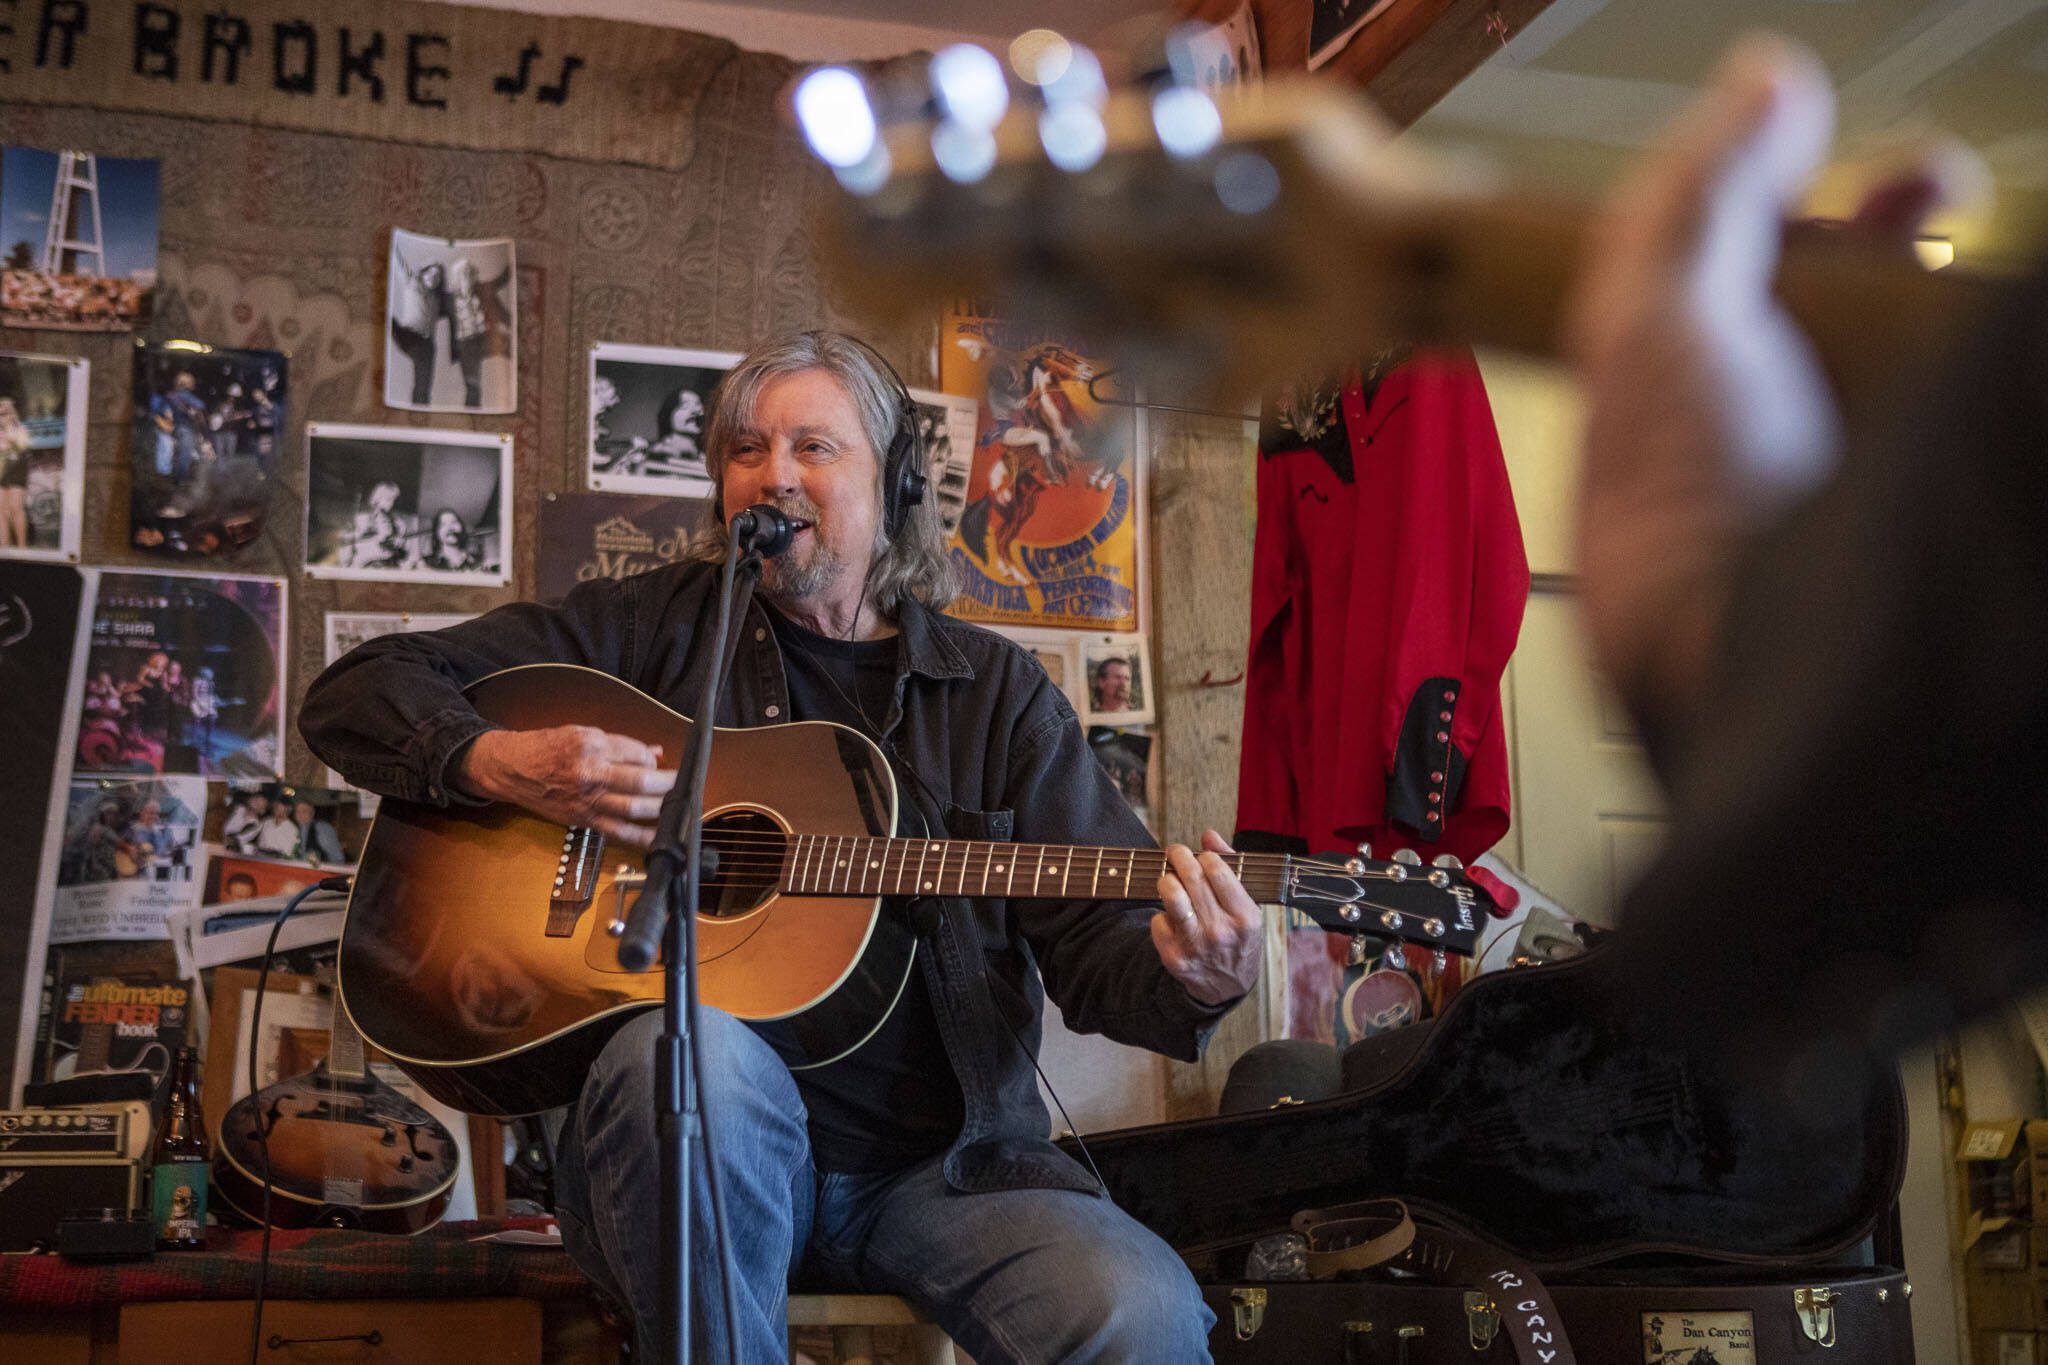 Dennis Coile also known as “Dan Canyon” sings and plays guitar during a Dan Canyon Band rehearsal in the group’s practice barn in Arlington, Washington, on Saturday, March 11, 2023. (Annie Barker / The Herald)